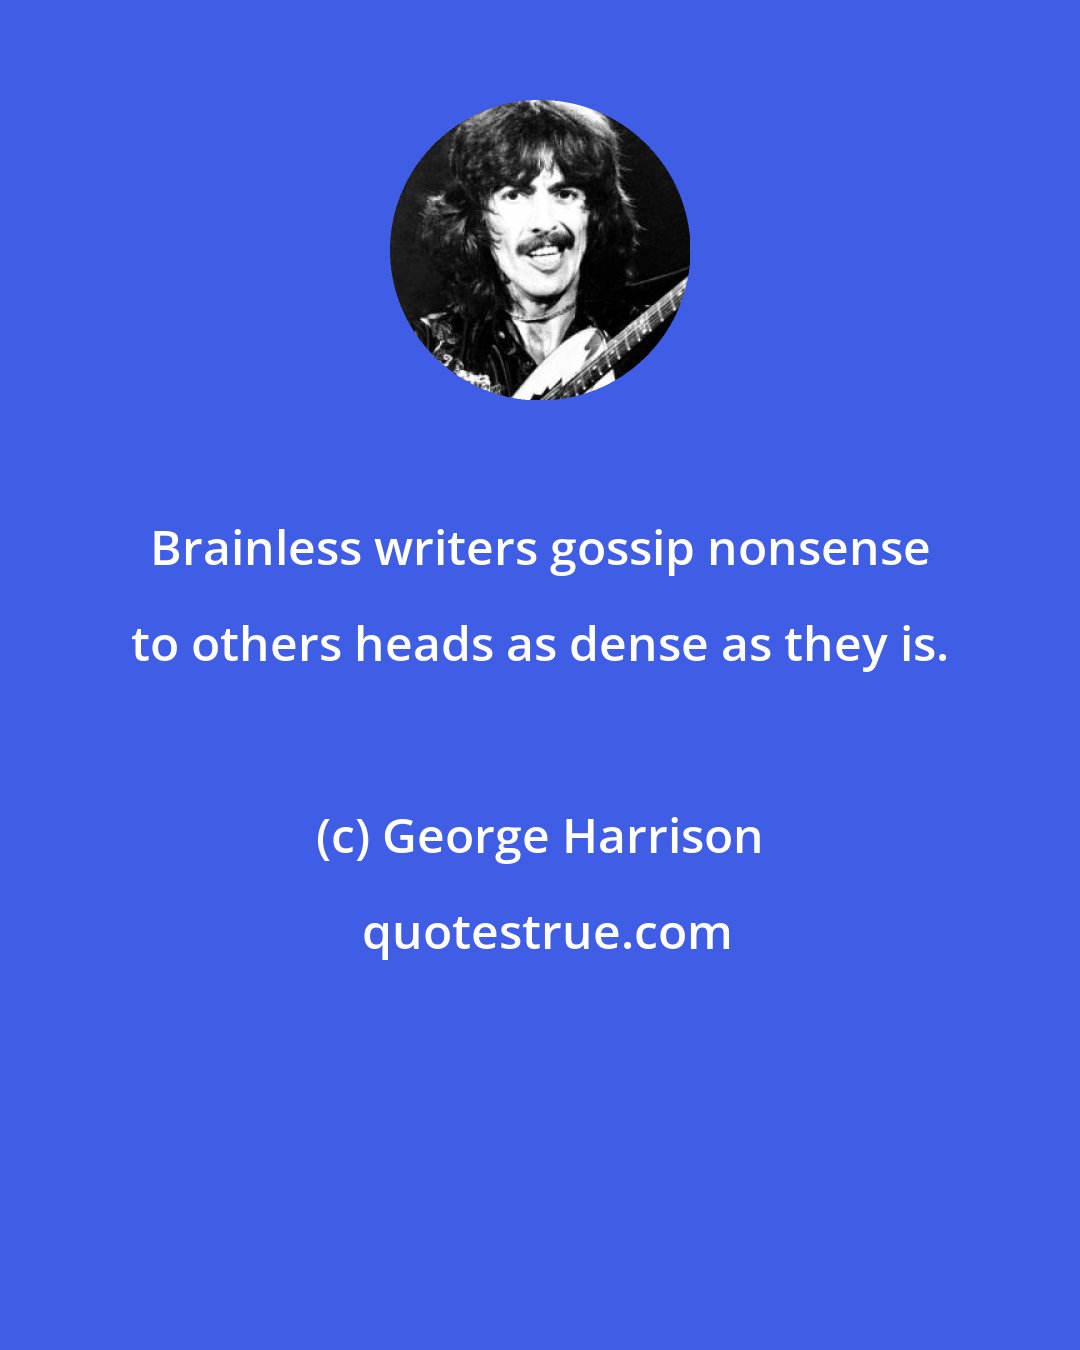 George Harrison: Brainless writers gossip nonsense to others heads as dense as they is.